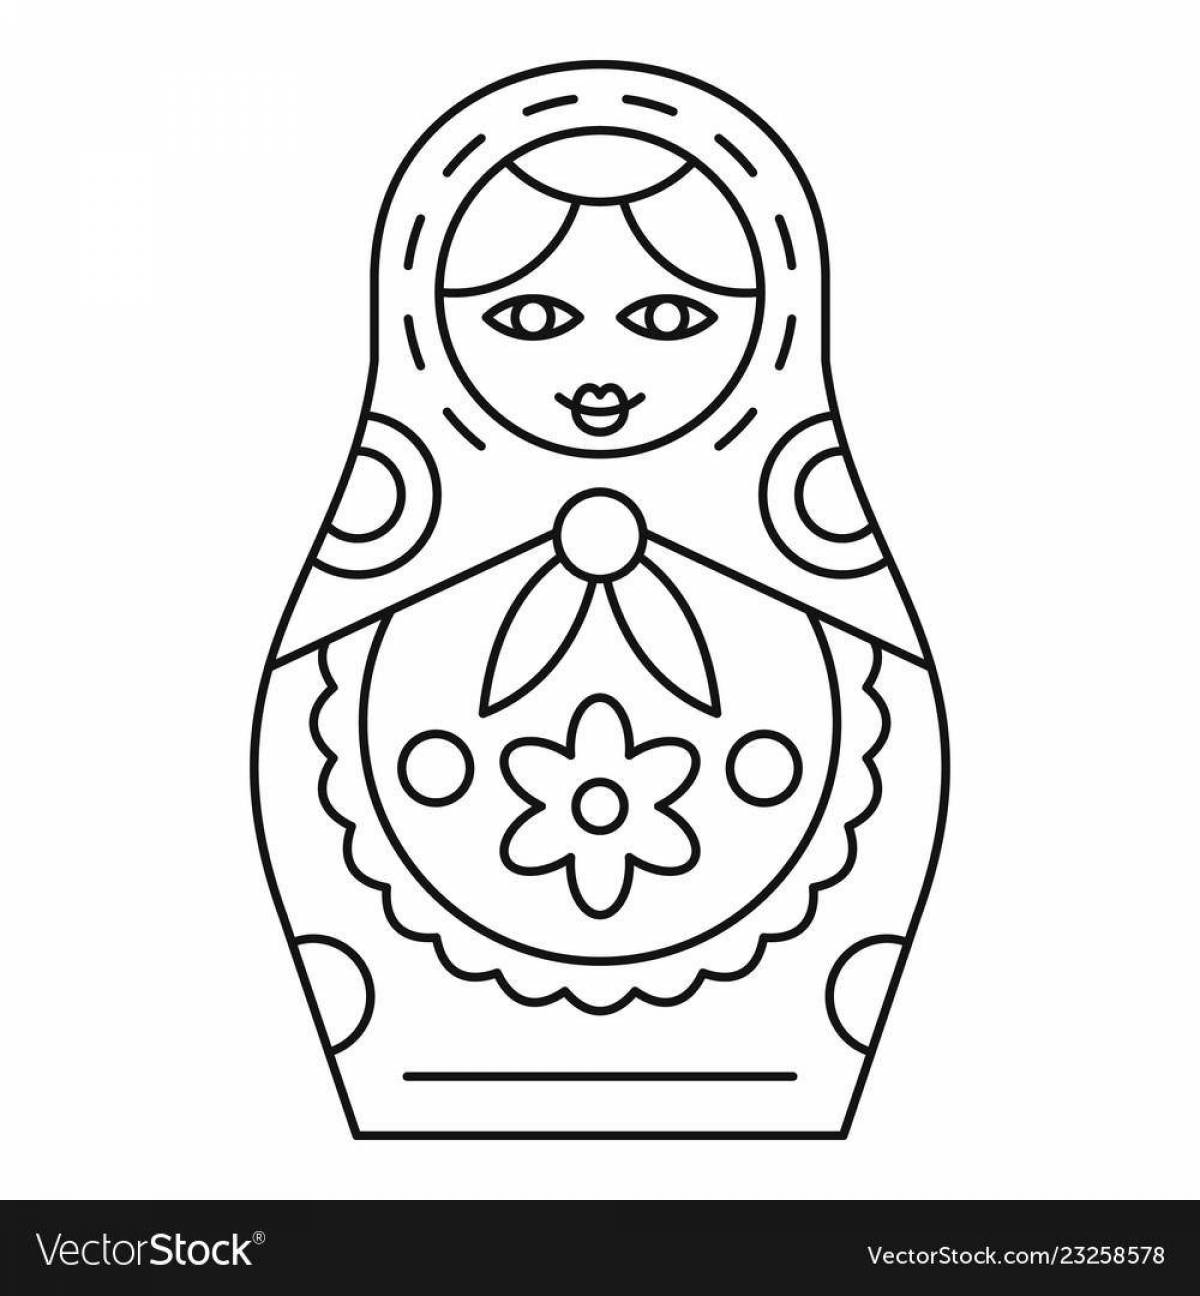 Glowing matryoshka coloring book for children 2-3 years old